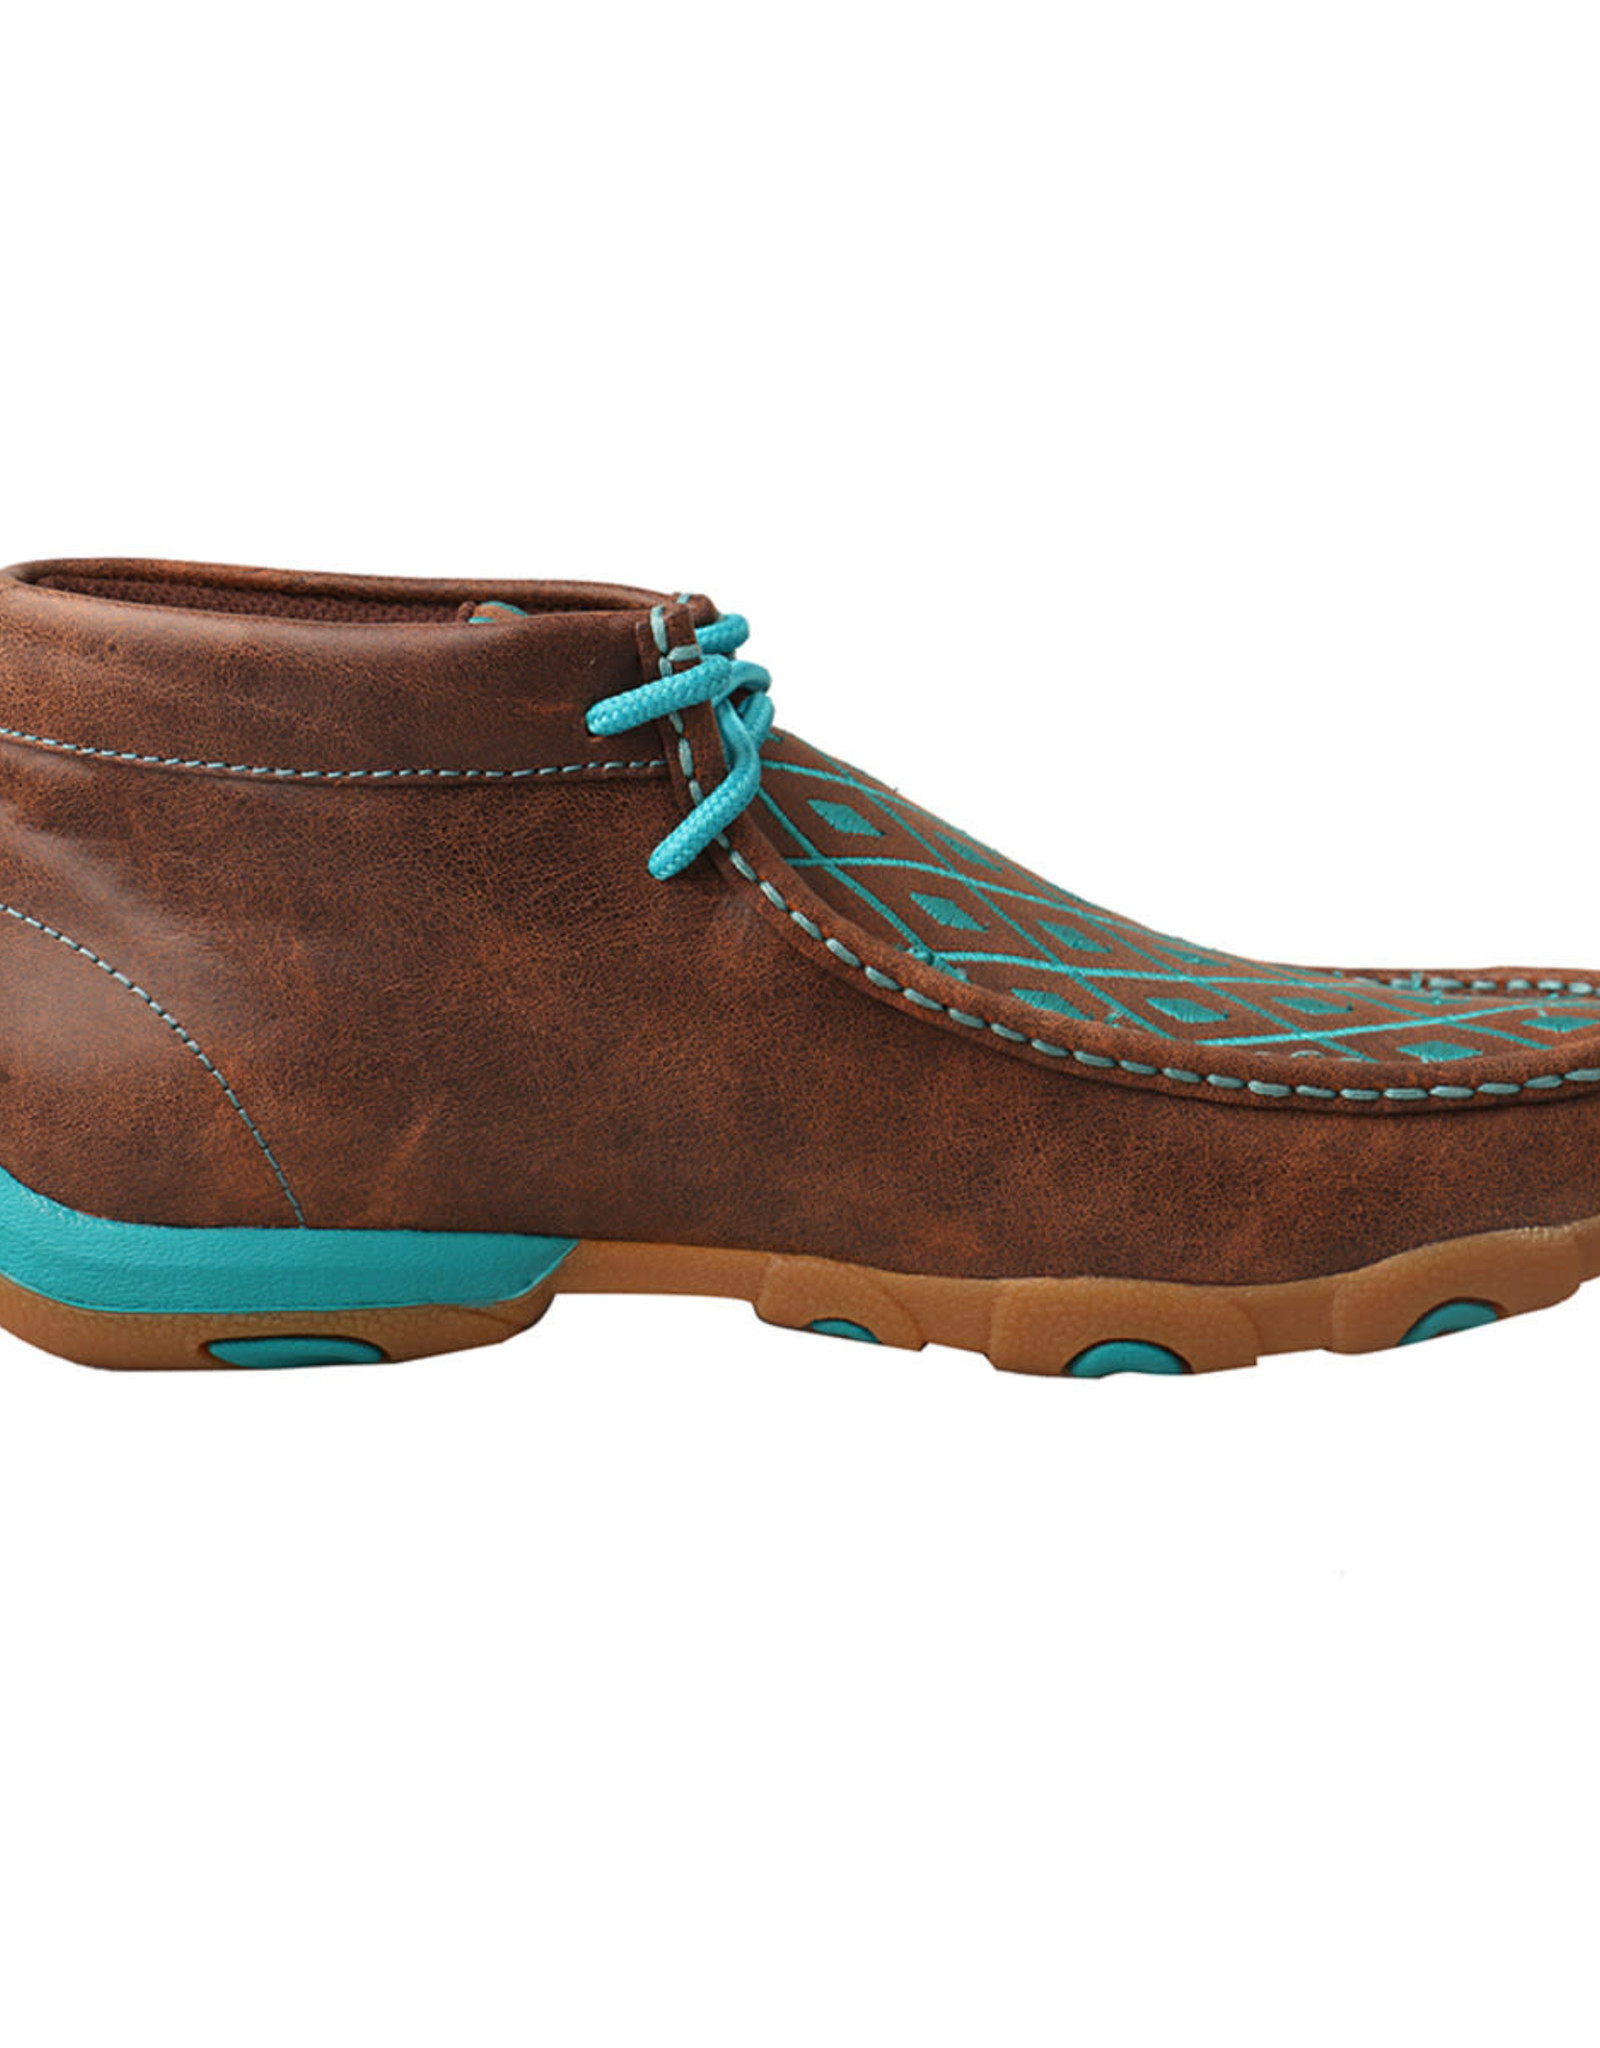 Womens Twisted X Chukka Driving Moc Brown Teal Embroidery